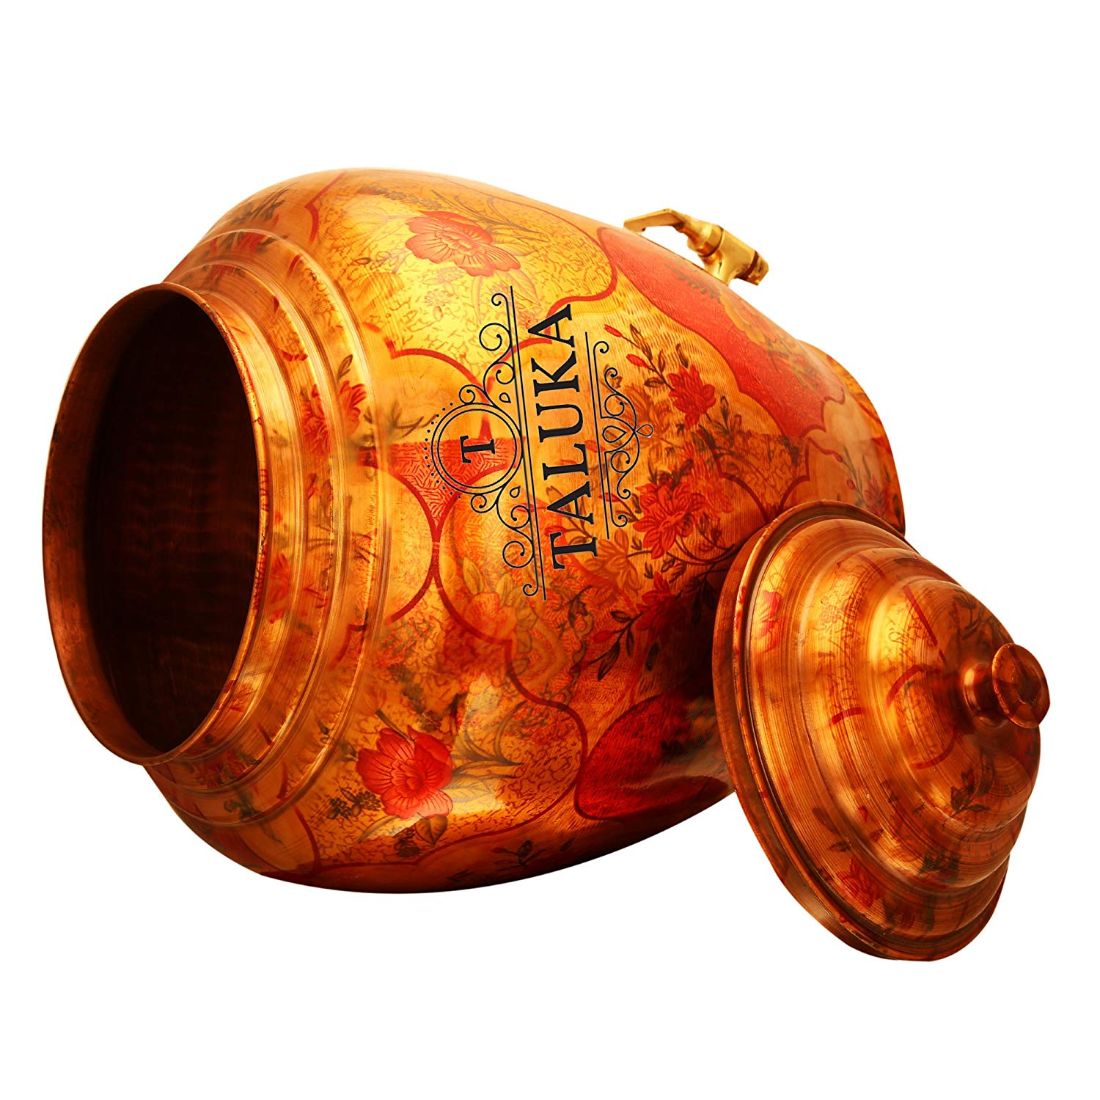 Pure Copper Handmade Water Pot Dispenser 2000 ML with 1 PC Copper Glass 300 ML For Storage Good Health Benefit